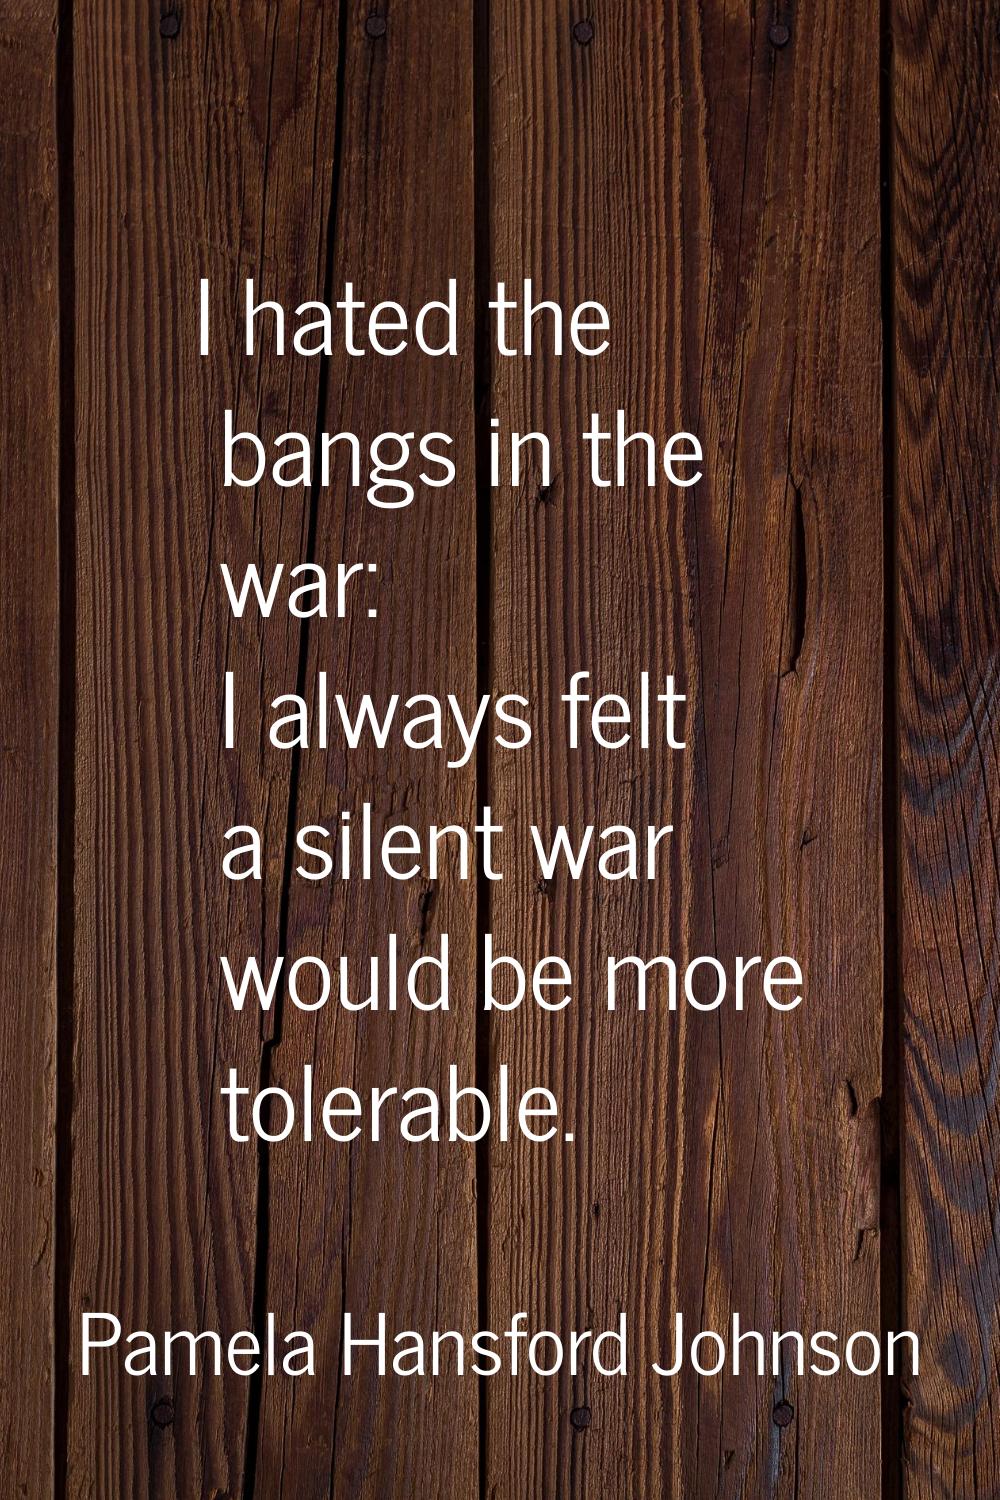 I hated the bangs in the war: I always felt a silent war would be more tolerable.